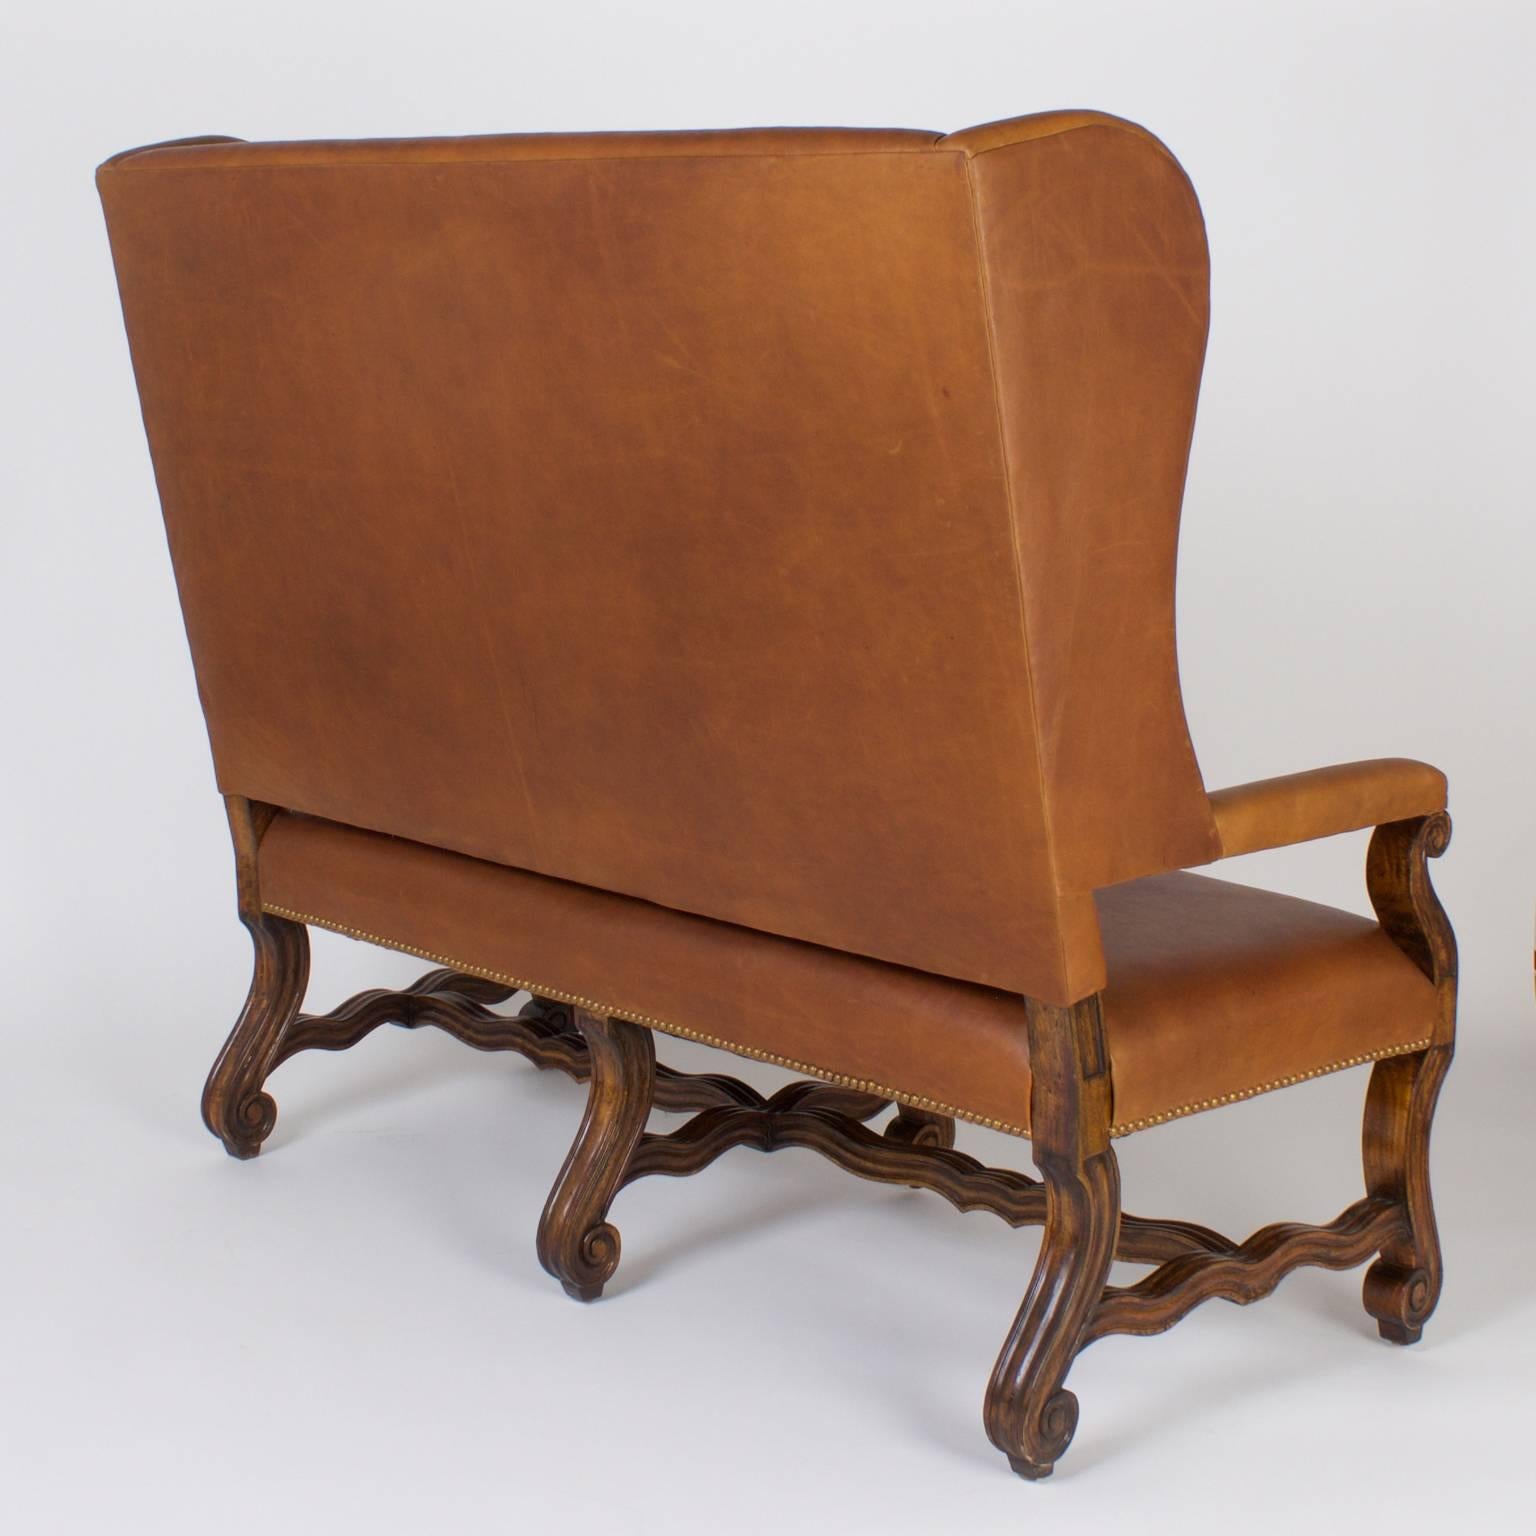 Spanish Colonial Handsome Ralph Lauren Style Brown Leather Settee